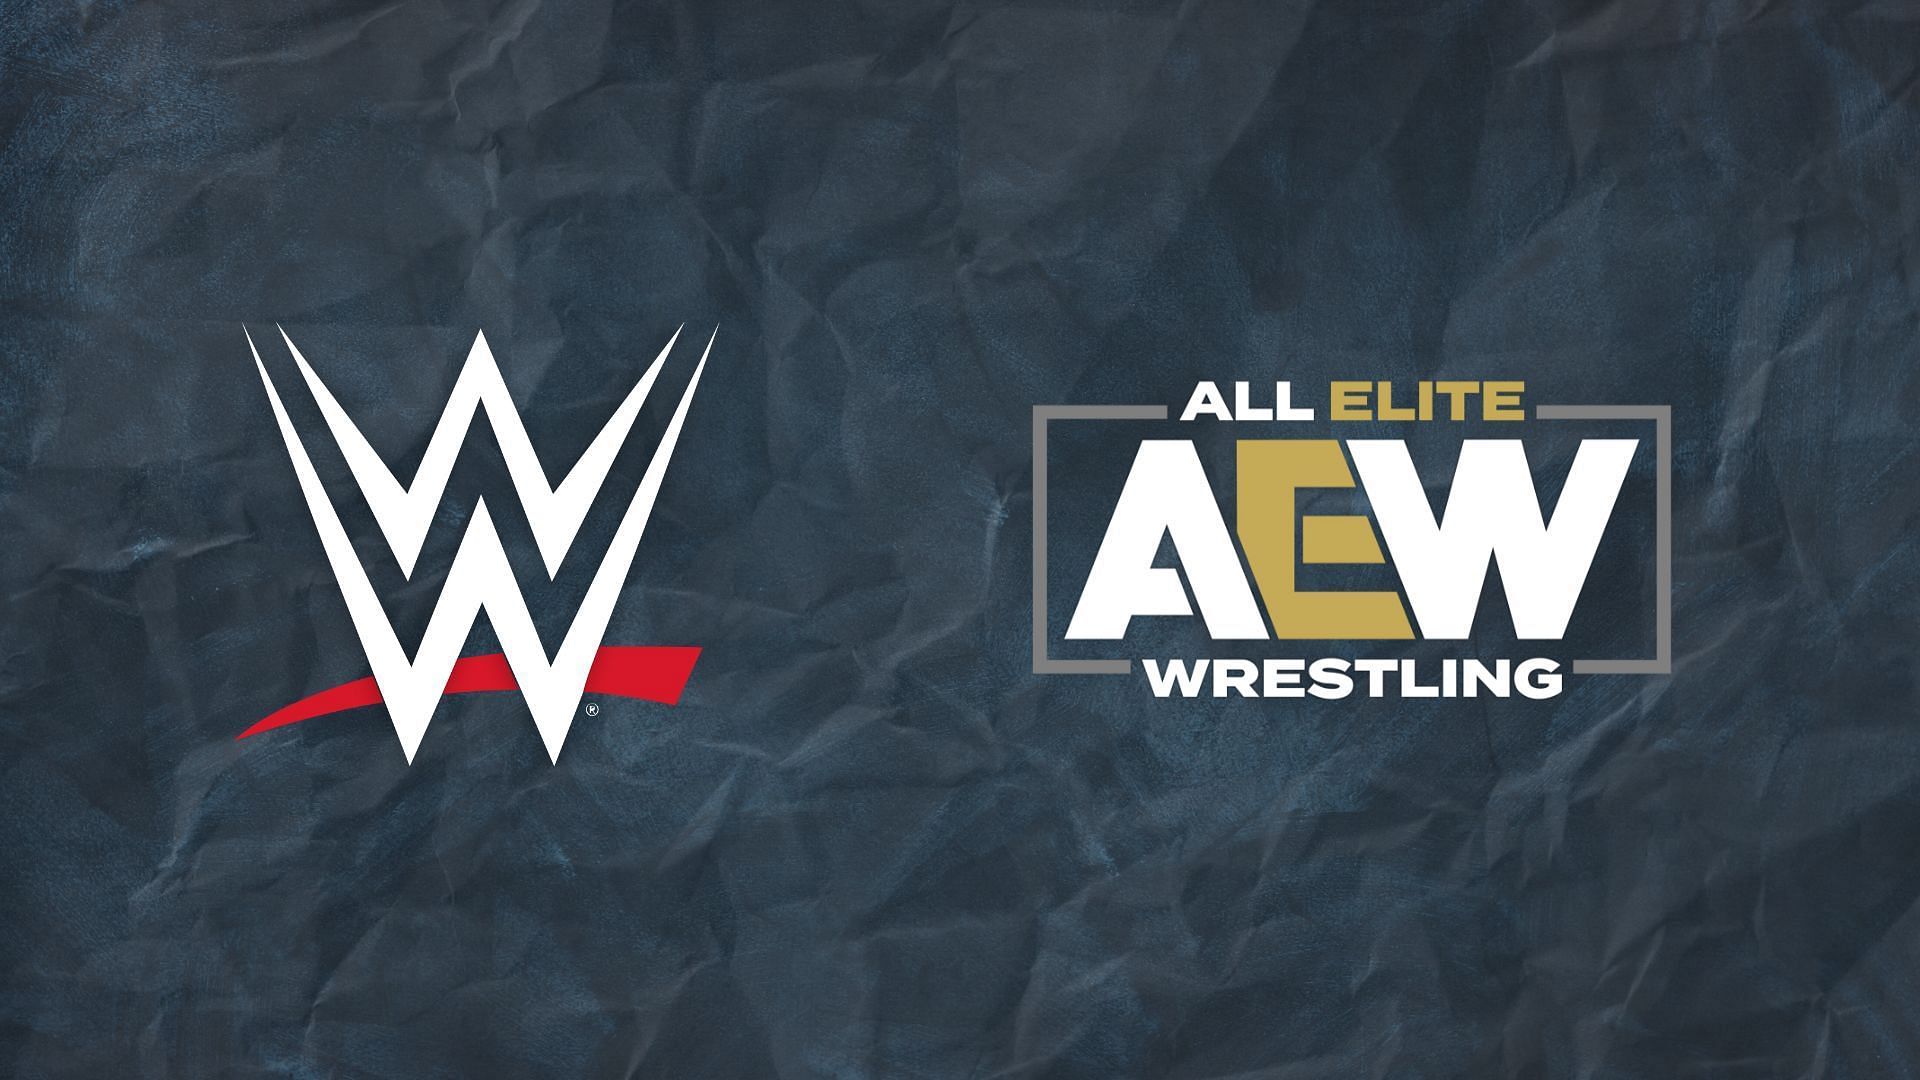 AEW has many former WWE superstars on its roster